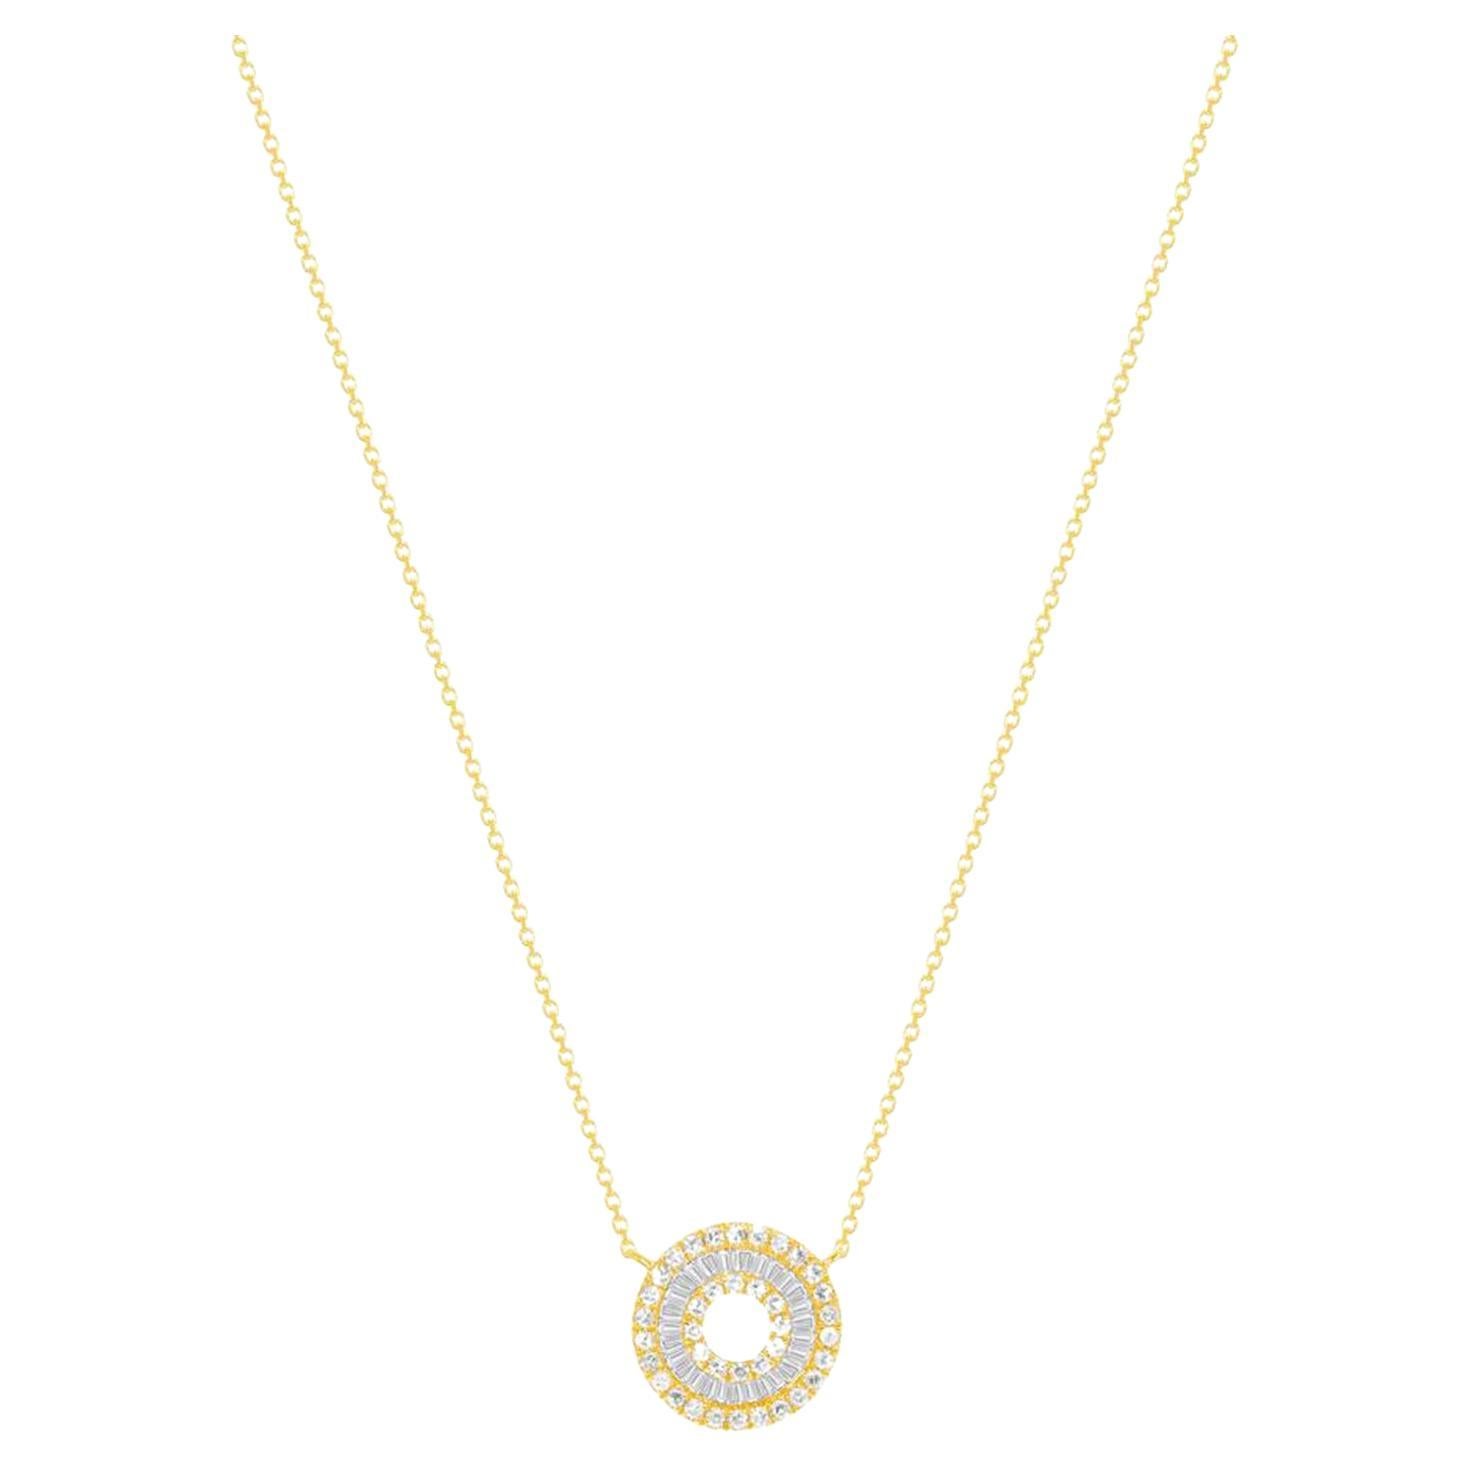 0.37 CT Diamond 18K Yellow Gold Circle Pendant Necklace Size 17.5" For Sale